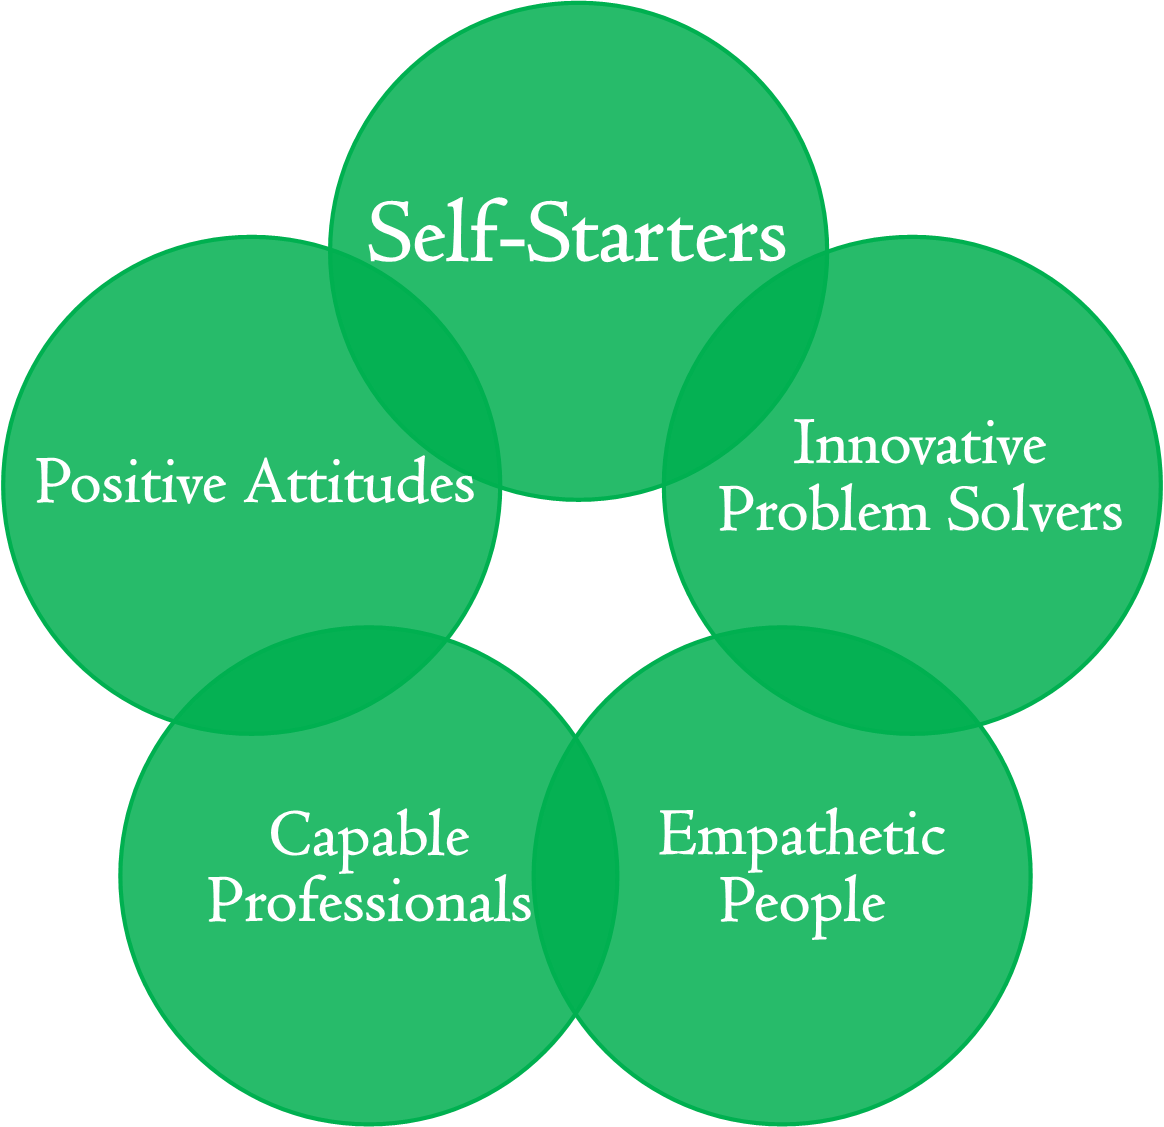 Our Values: Self-Starters, Positive Attitudes, Capable Professionals, Empathetic People, and Innovative Problem Solvers